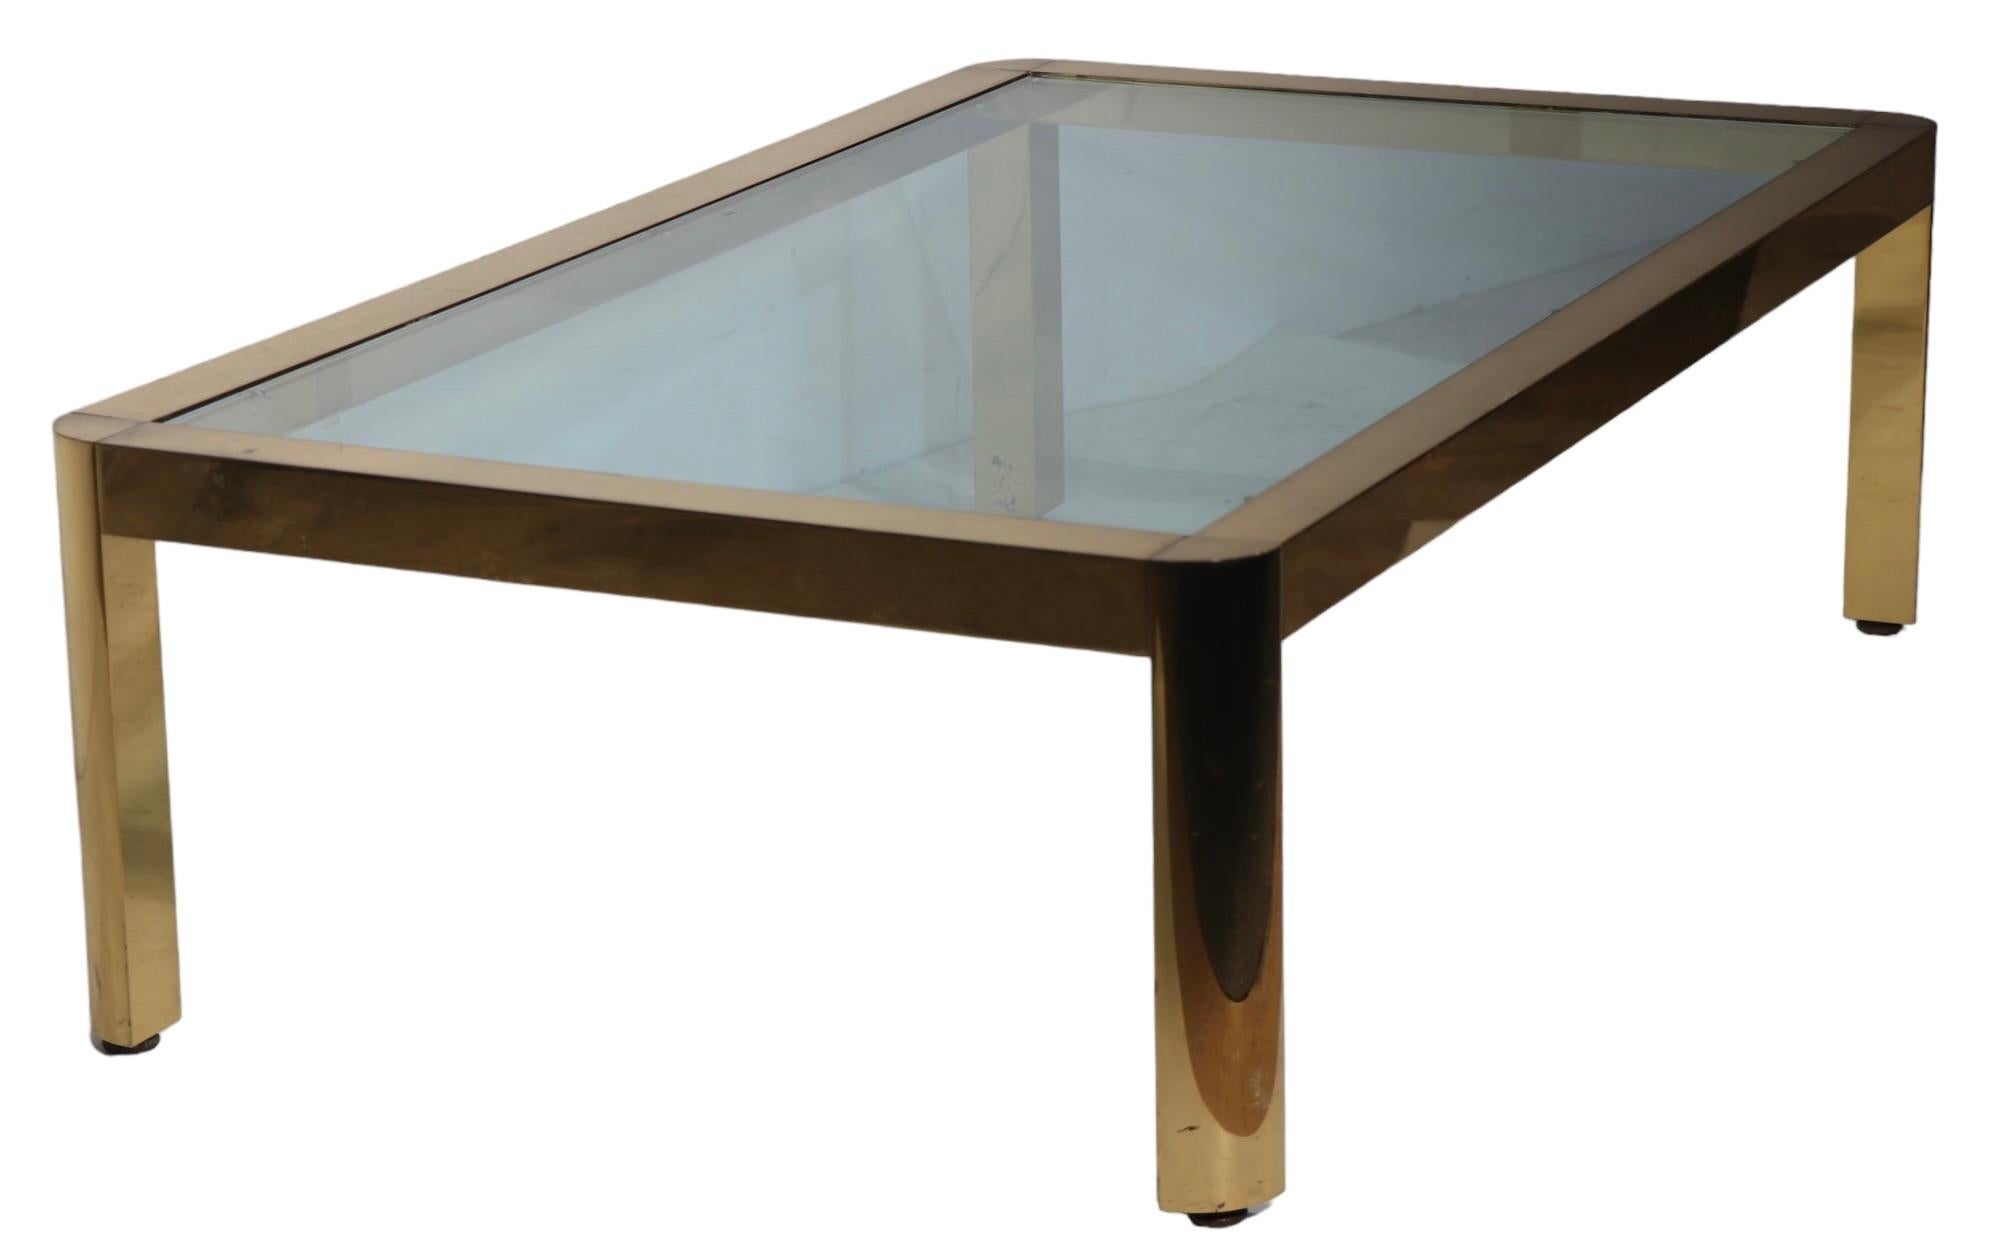 Postmodern Hollywood Regency Brass and Glass Coffee Table Made in Italy c 1970's For Sale 6